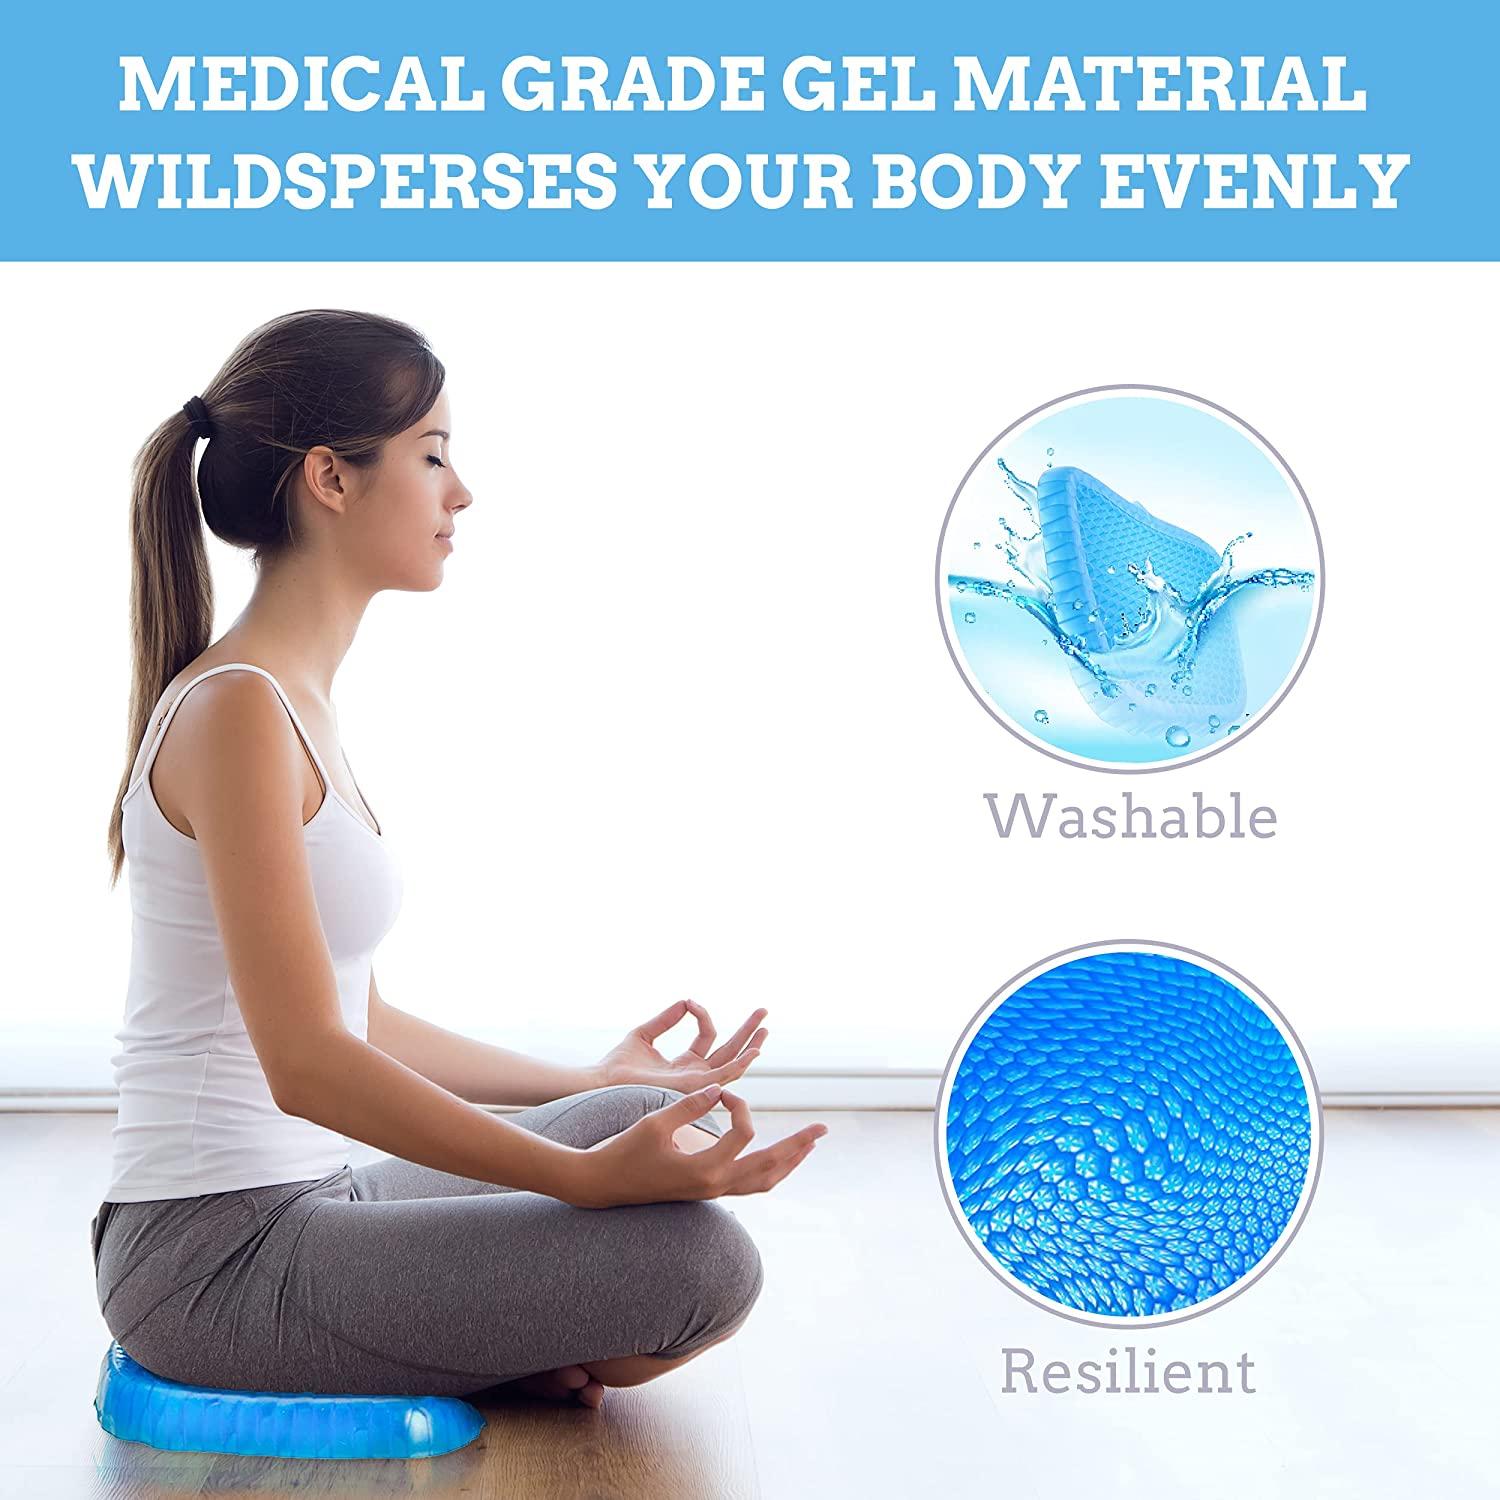 Gel Seat Cushion for Long Sitting - Portable Gel Cushion with Ergonomic  Honeycomb Design - Small Size 14.5 x 12 x 1.5 Gel Seat Cushions for Pressure  Relief Sores Effective for Sedentary